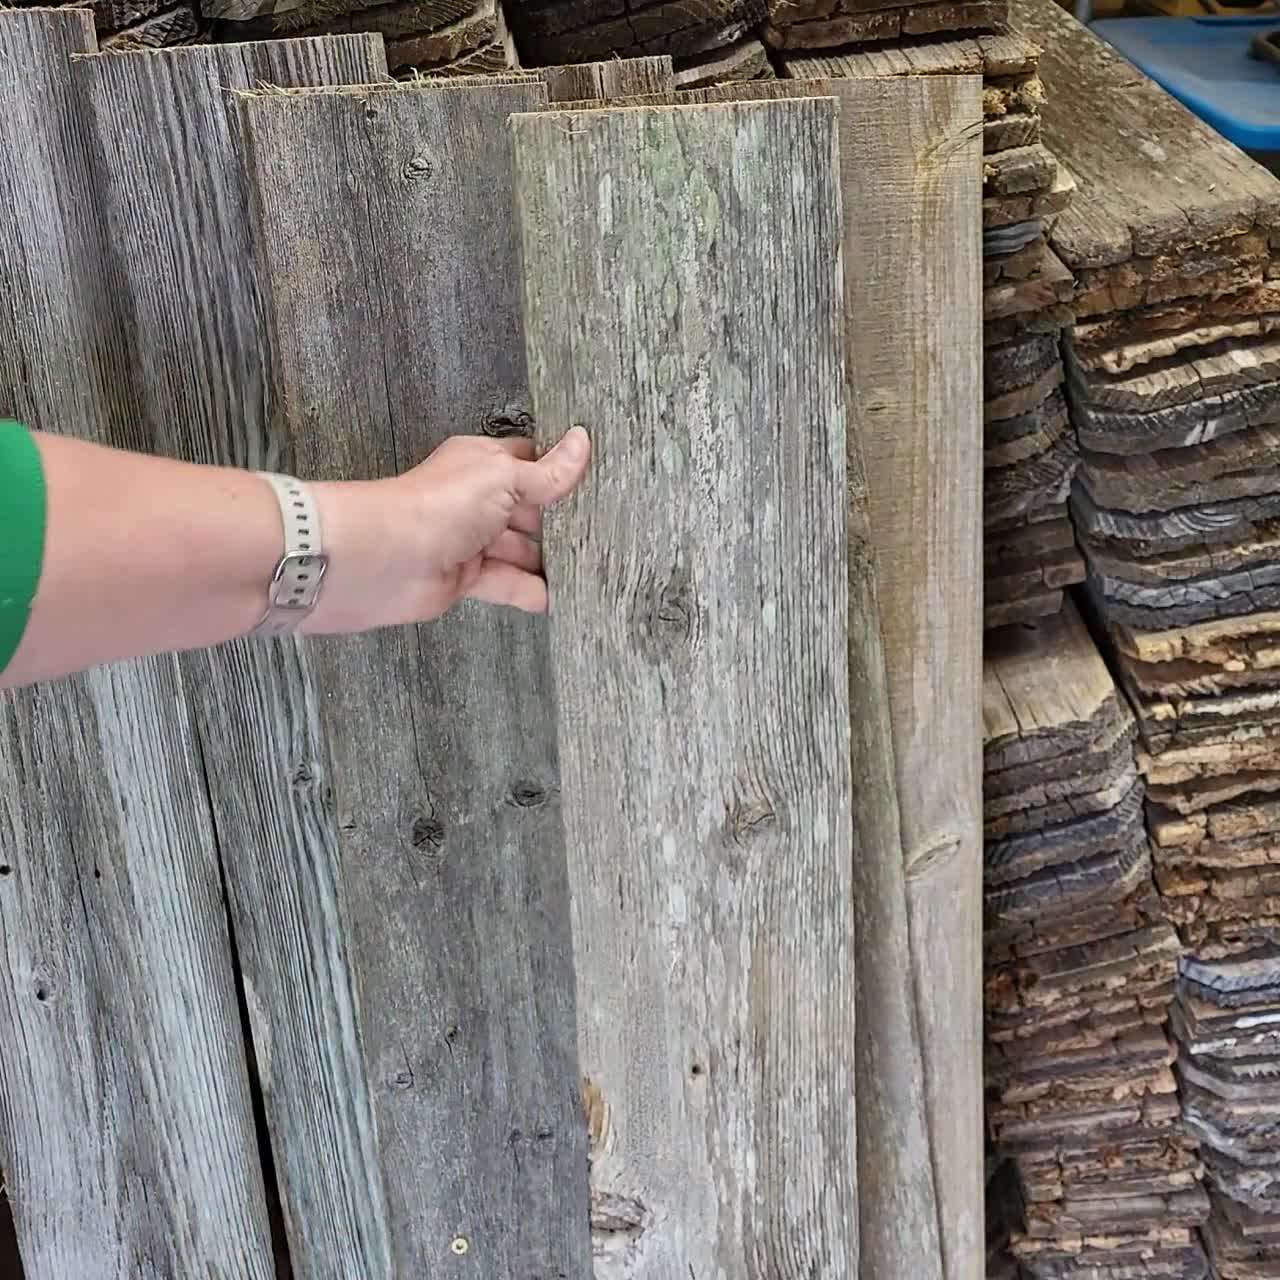 Shaper fence and cover boards - Canadian Woodworking and Home Improvement  Forum